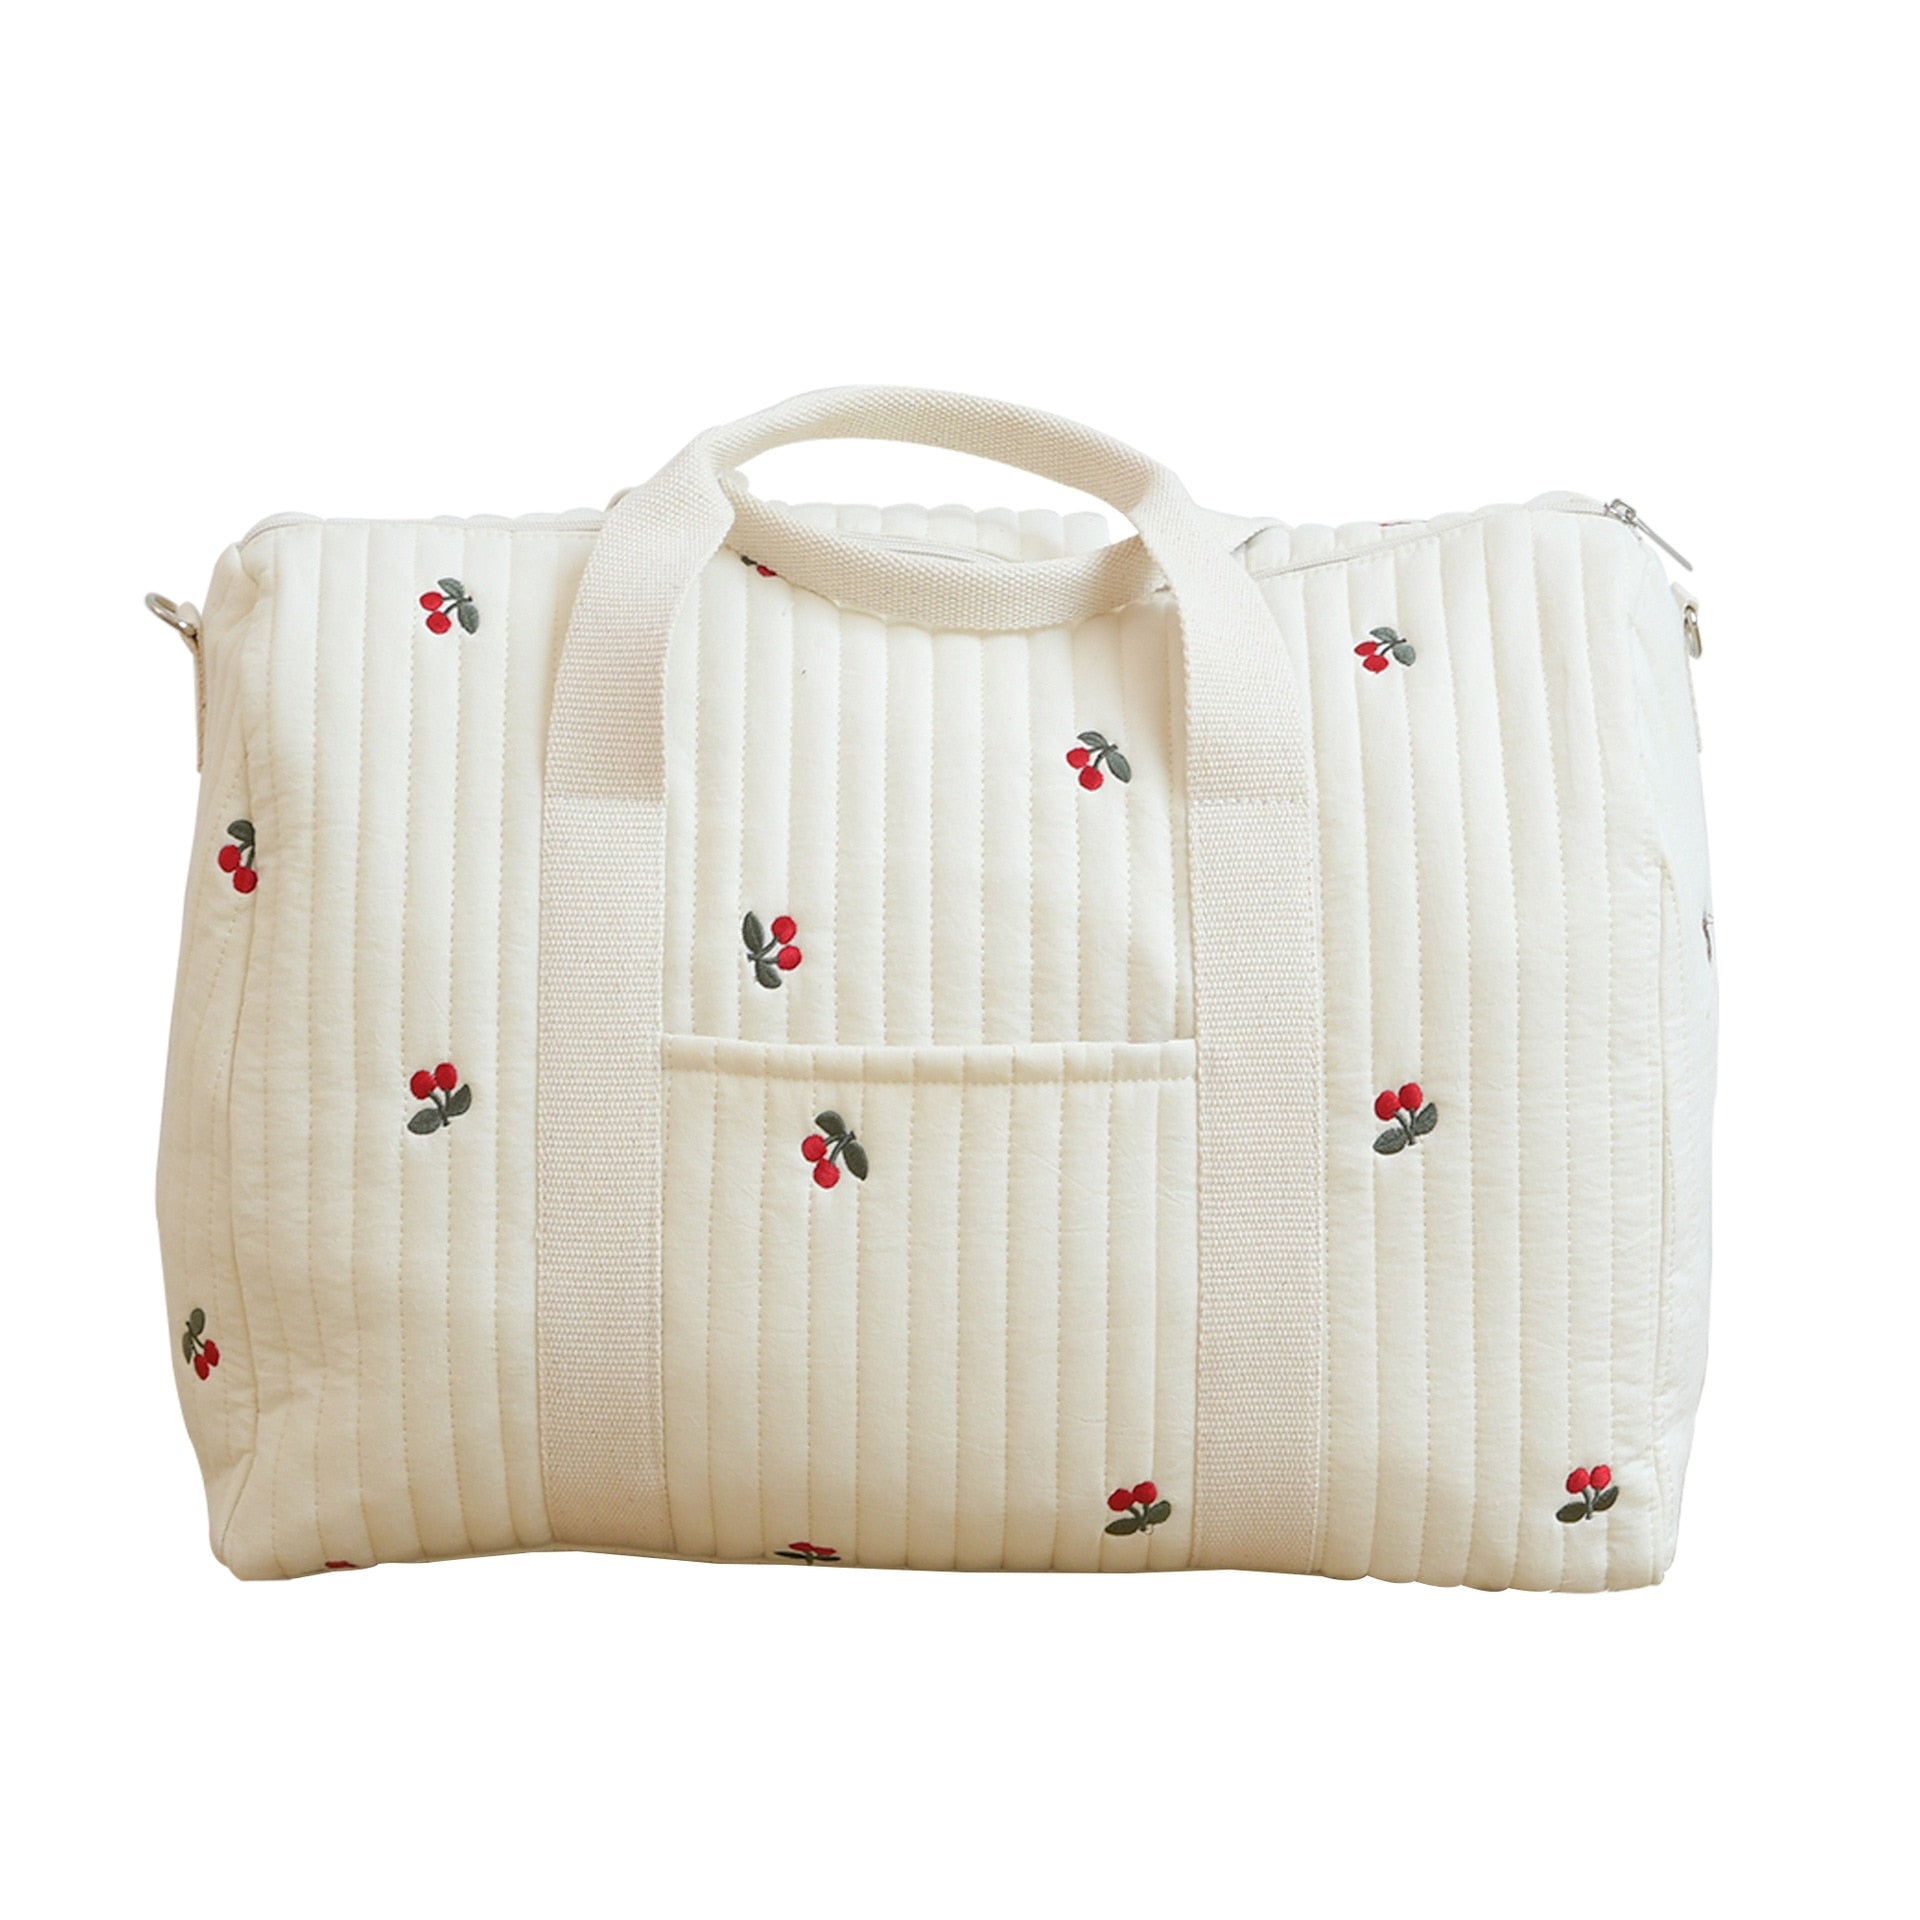 Adorably Quilted Maternity Bag - Cherries